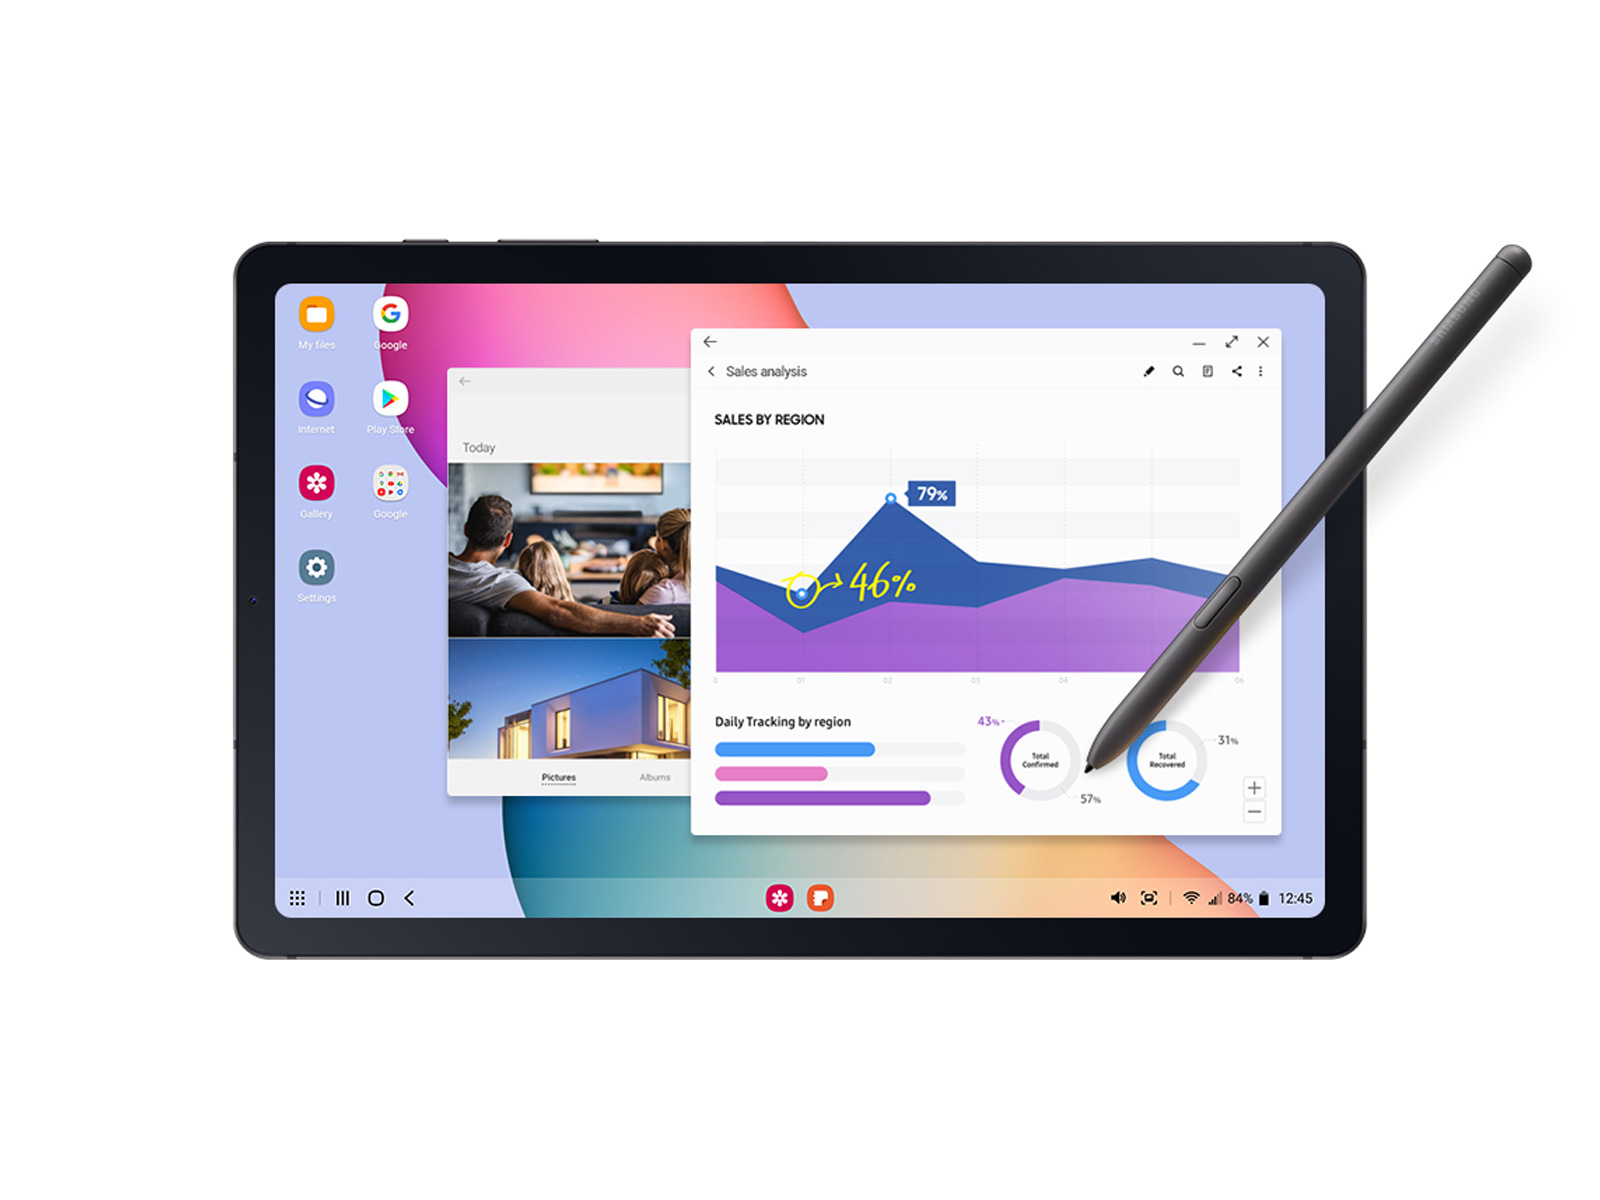 Thumbnail image of Galaxy Tab S6 Lite, 128GB, Oxford Gray (Wi-Fi) S Pen included